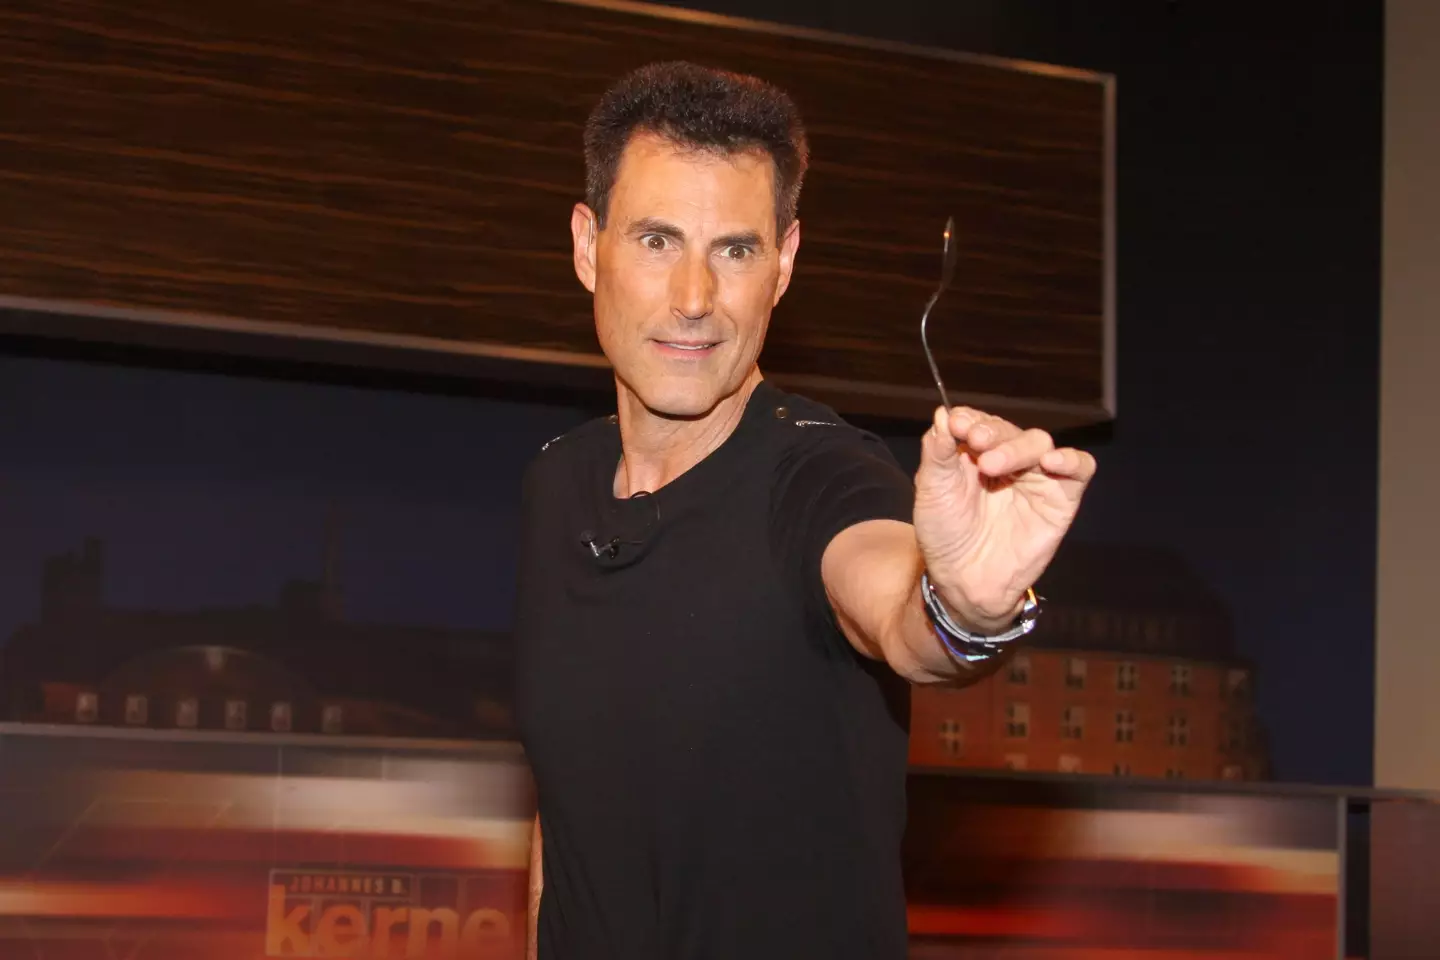 Uri Geller's lawsuit against Pokémon stopped them from making Kadabra cards, until he finally dropped it.